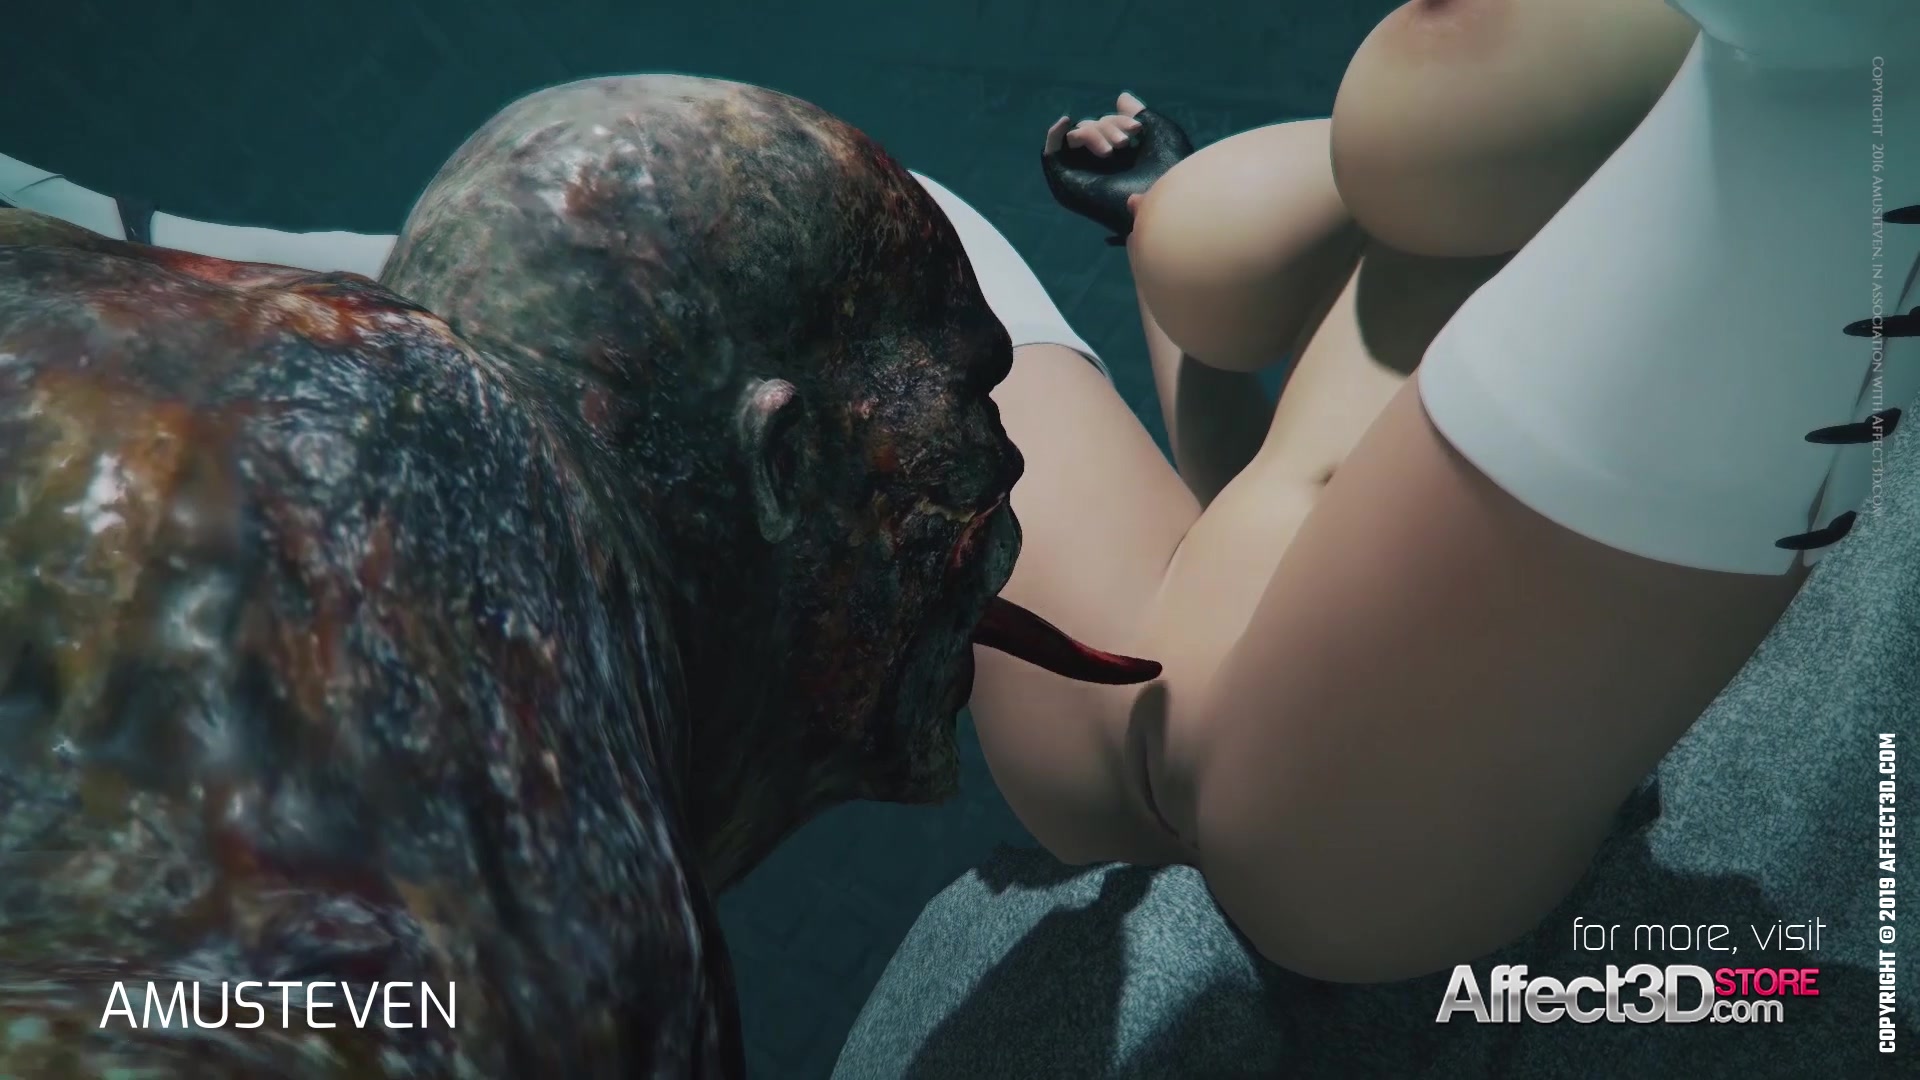 Monster 3d Big Tits - 3d animation monster sex with a redhead big tits babe